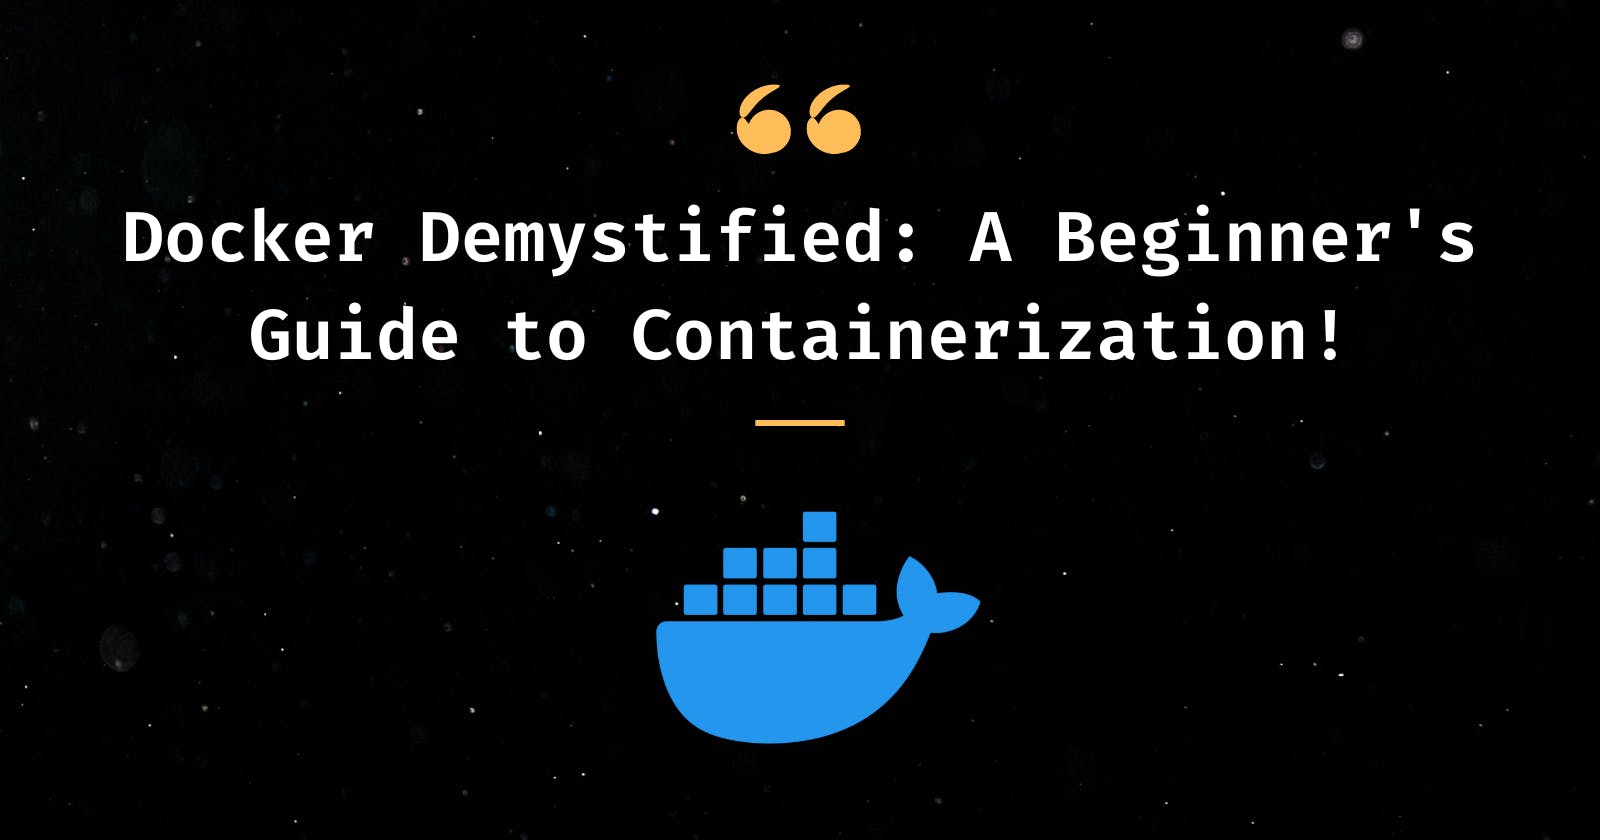 Docker Demystified: A Beginner's Guide to Containerization